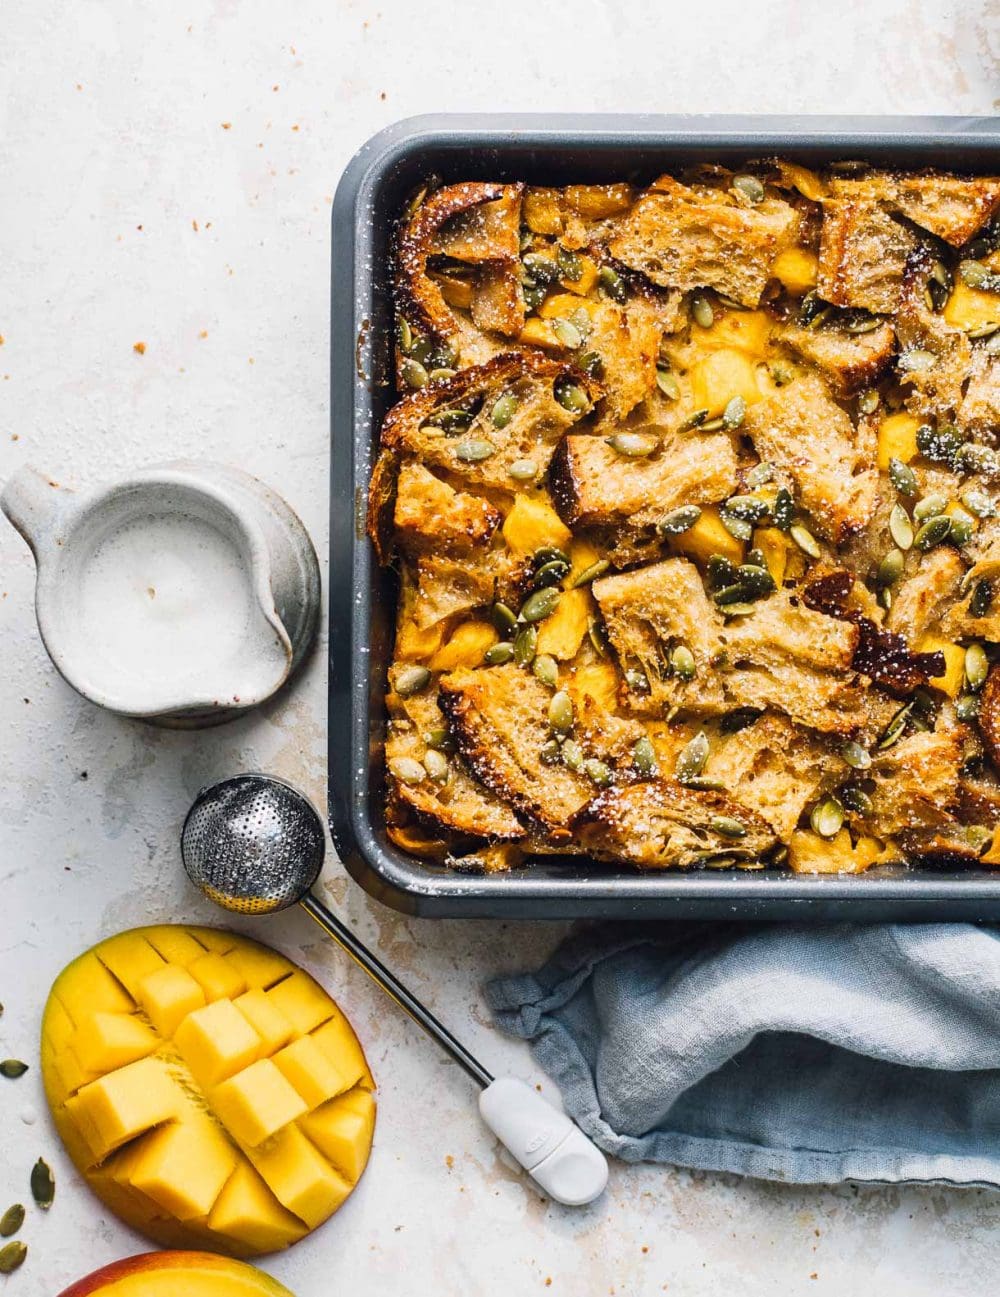 mango bread pudding in a baking pan, with cream on the right side.